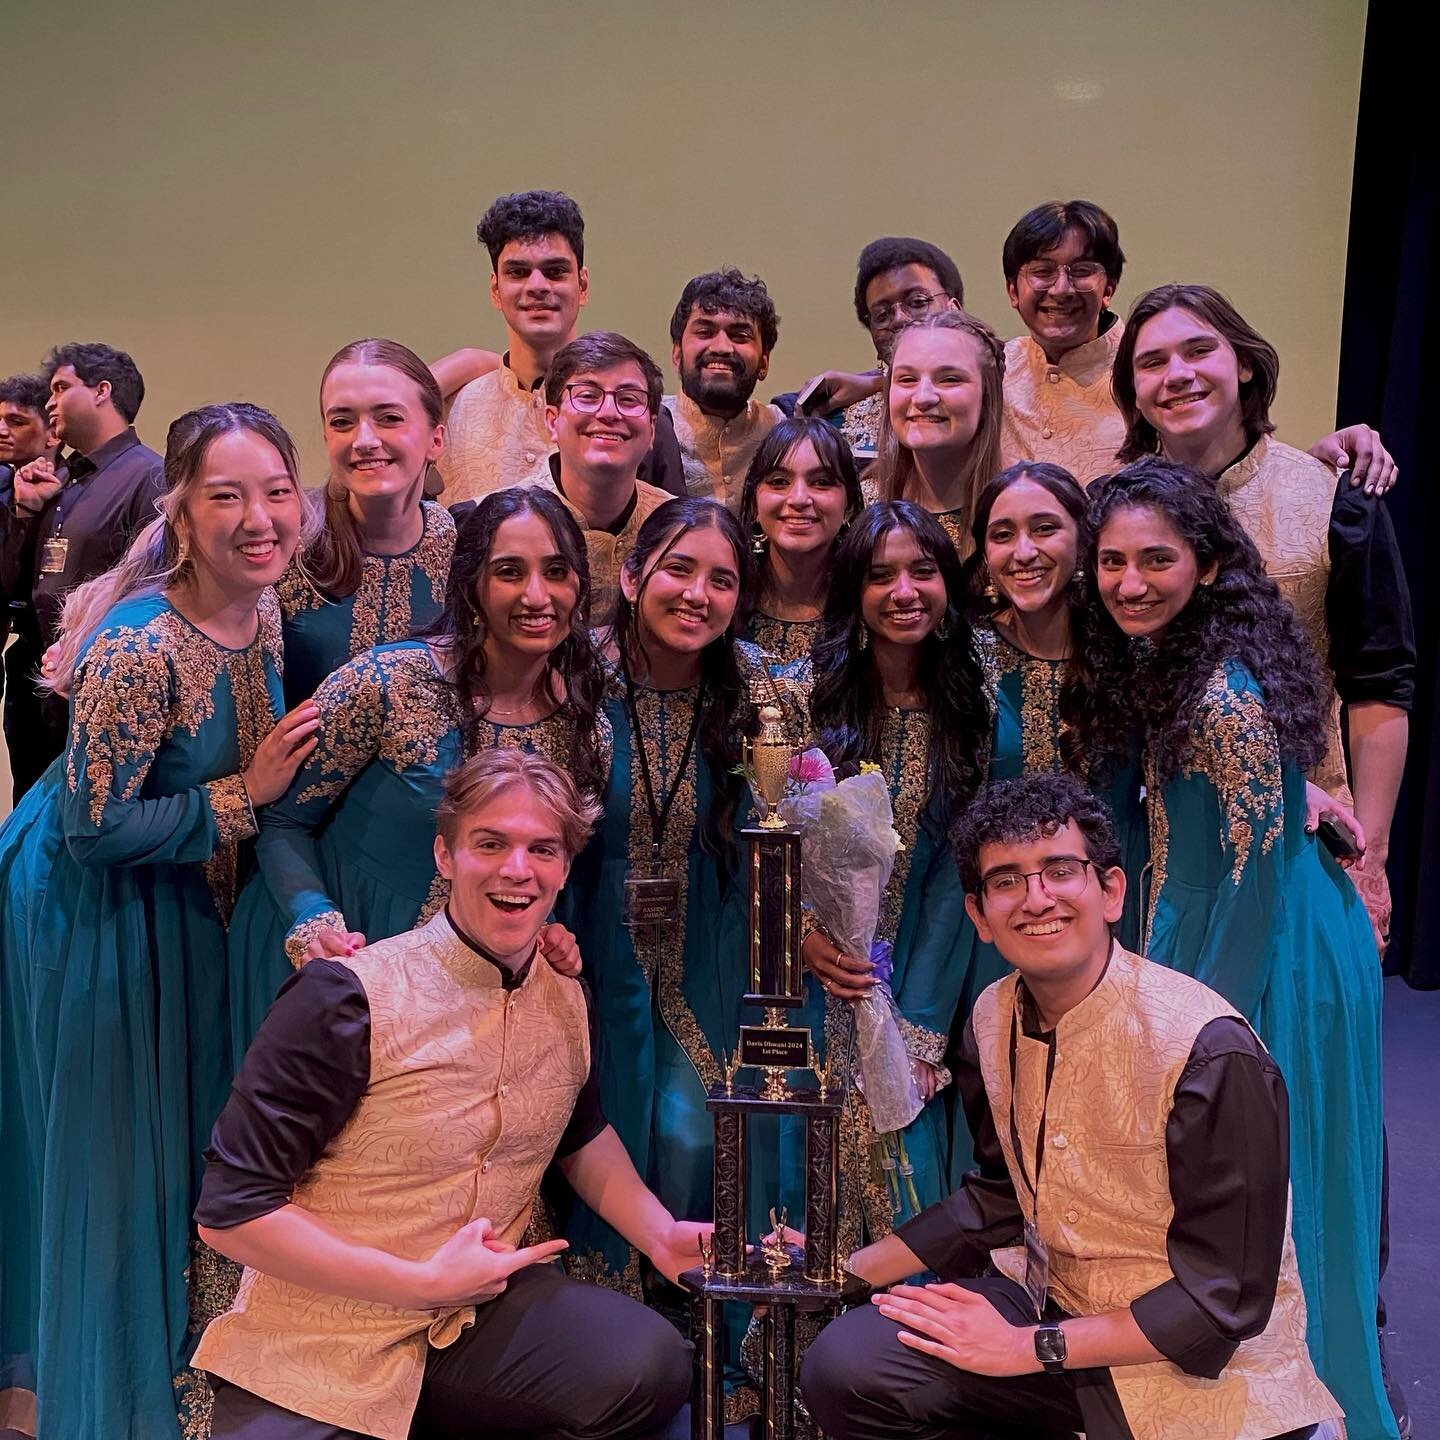 Last weekend, Dhamakapella traveled all the way to sunny Davis, California to compete at our second bid competition for All-American Awaaz, @davisdhwani. We are so proud to announce that we placed FIRST, bringing home🥇DHA GOLD🥇once again!

We also 